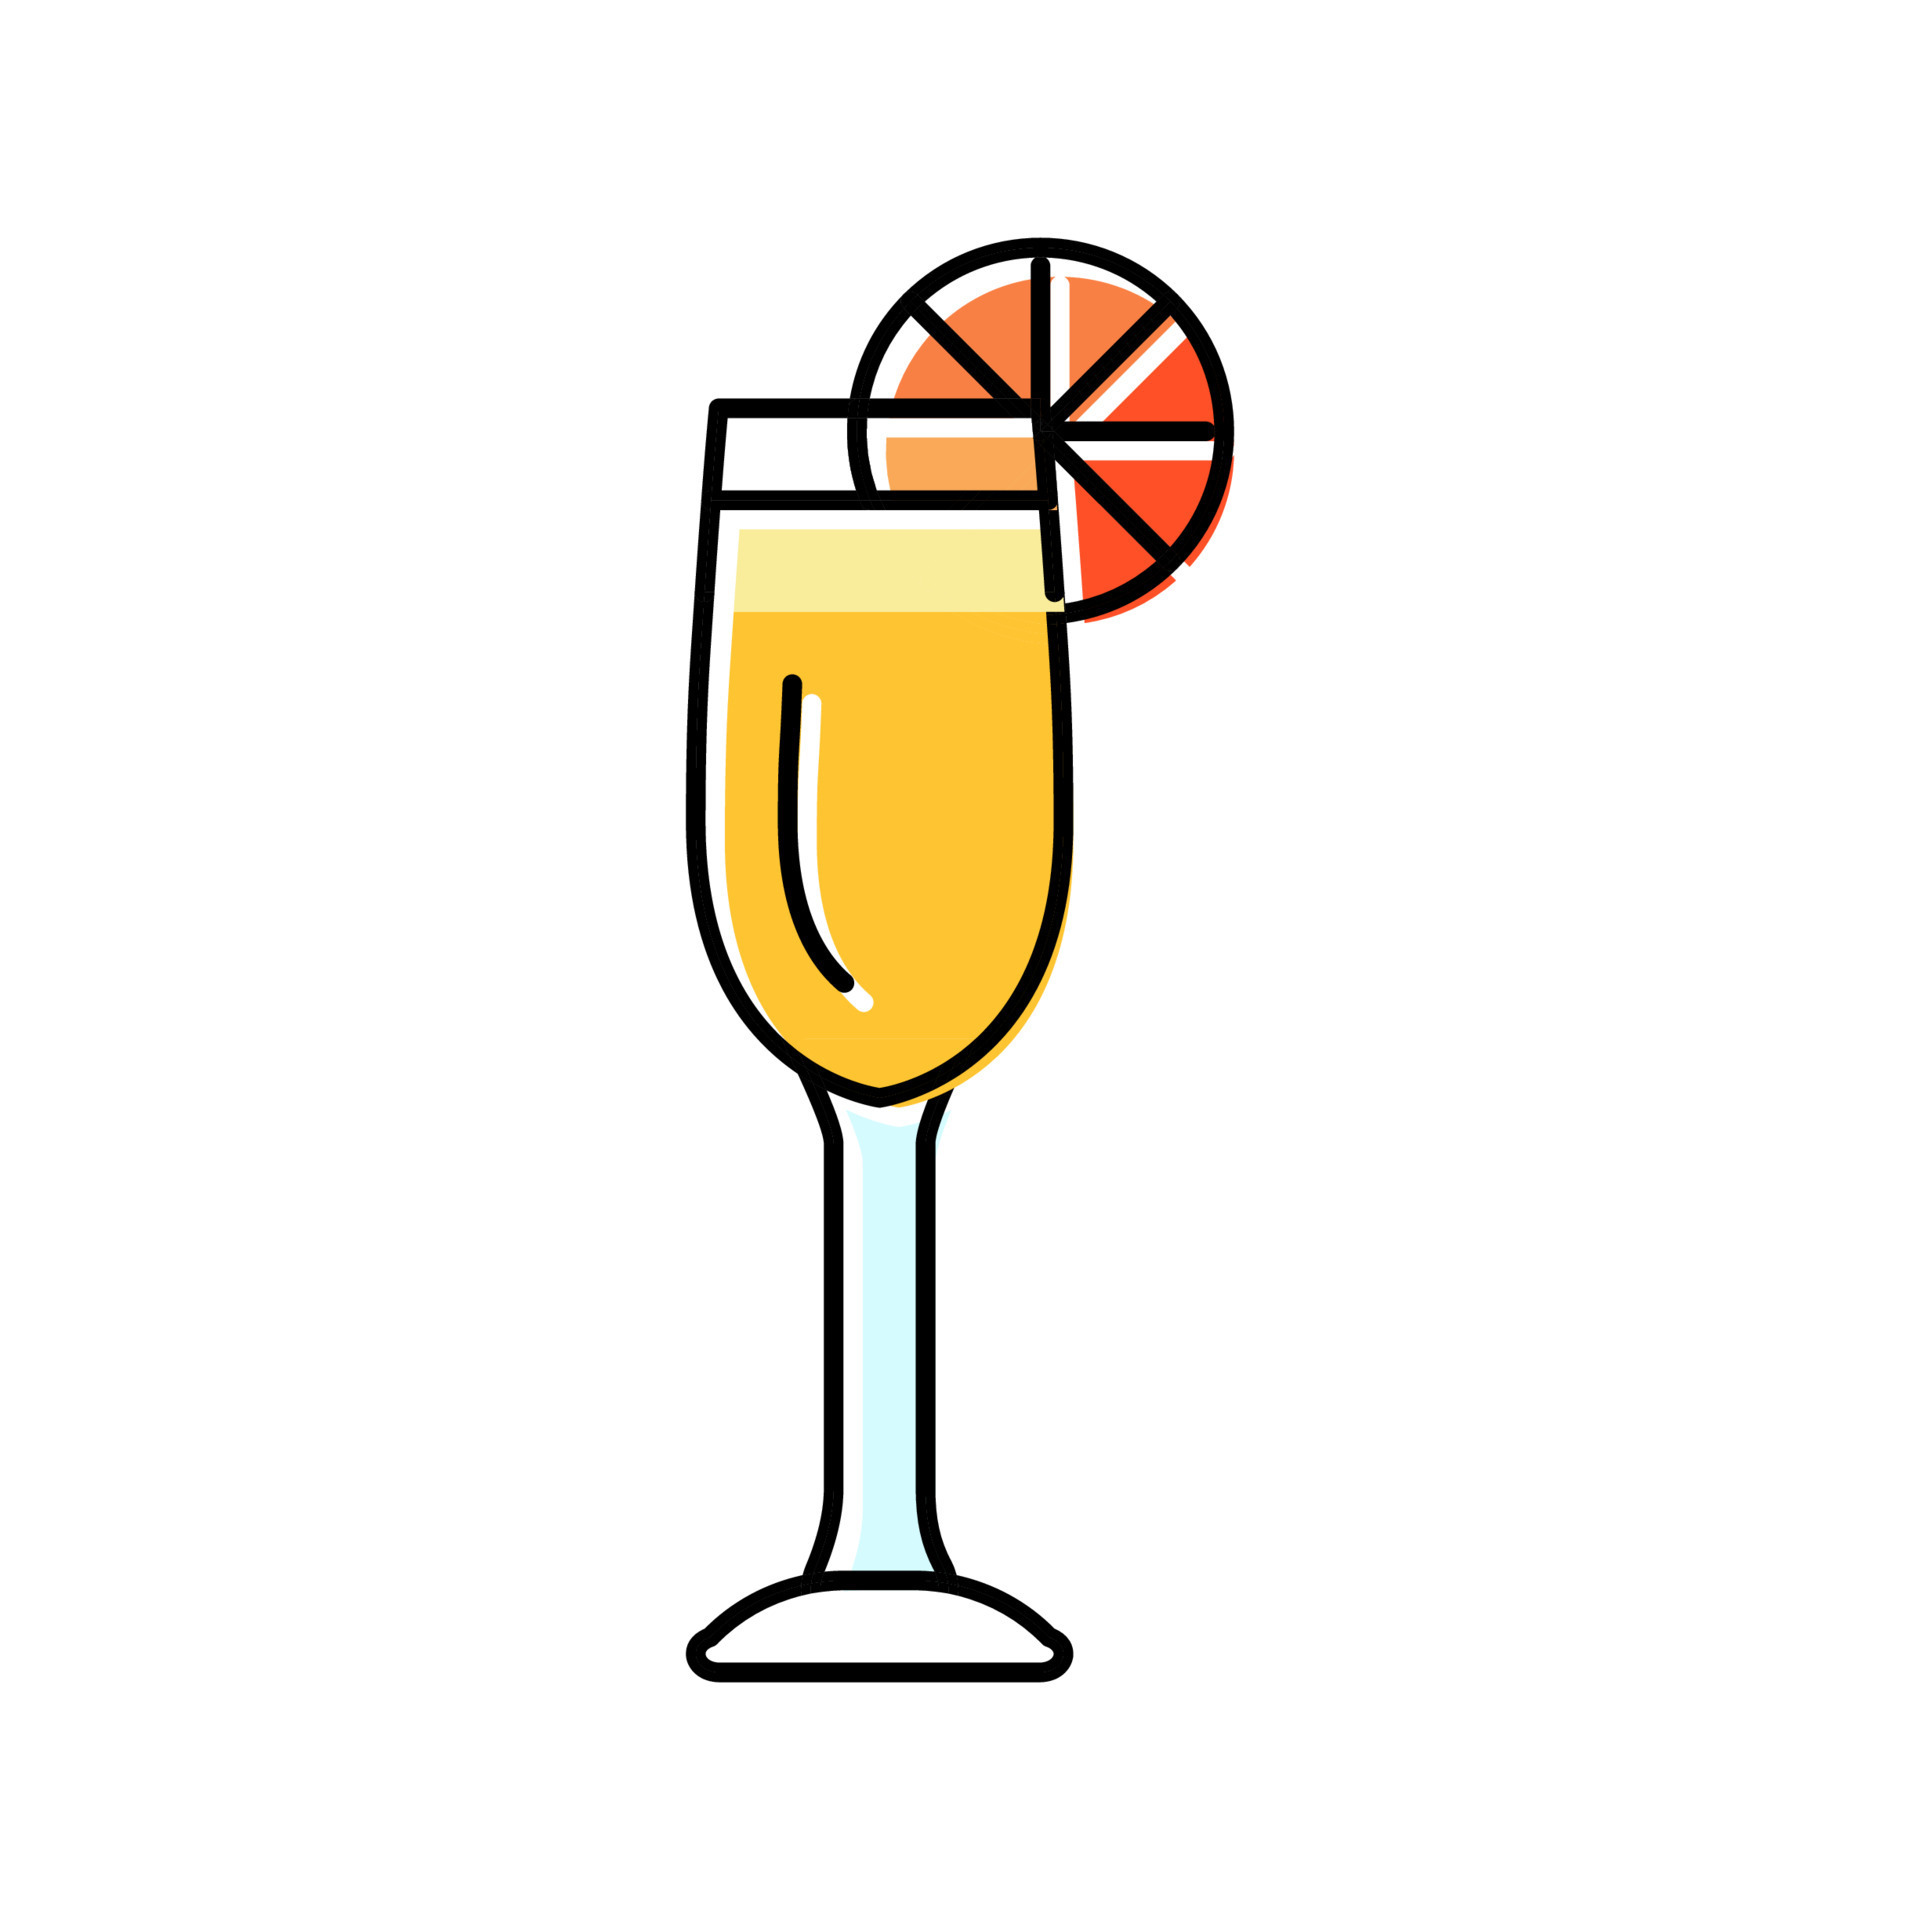 https://static.vecteezy.com/system/resources/previews/019/542/296/original/mimosa-cocktail-glass-drink-color-icon-illustration-vector.jpg